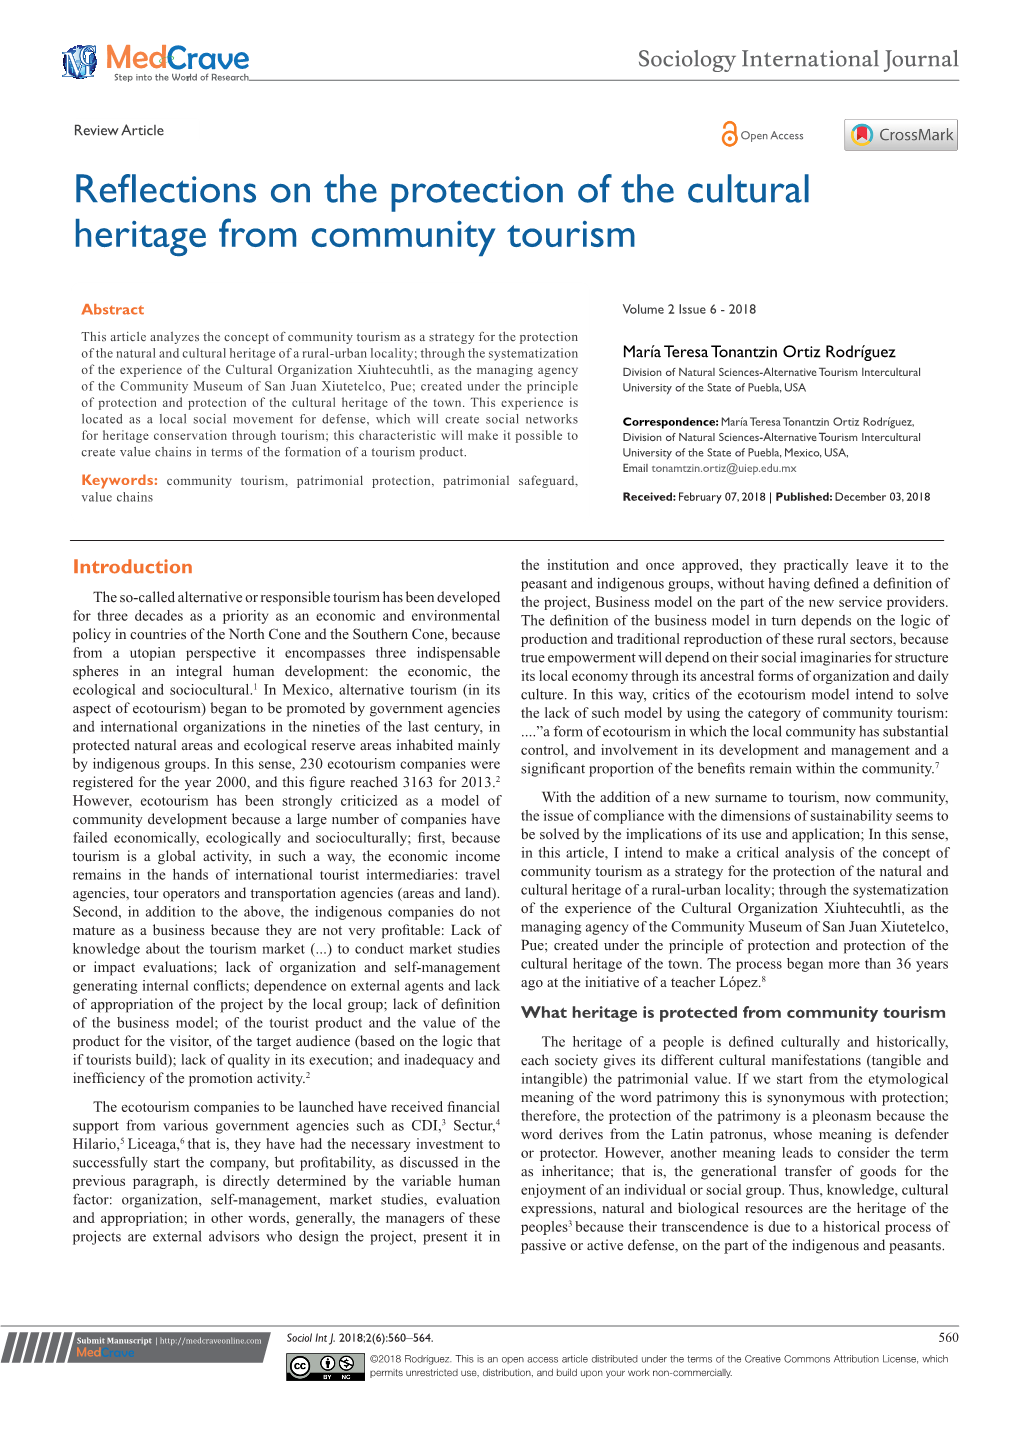 Reflections on the Protection of the Cultural Heritage from Community Tourism